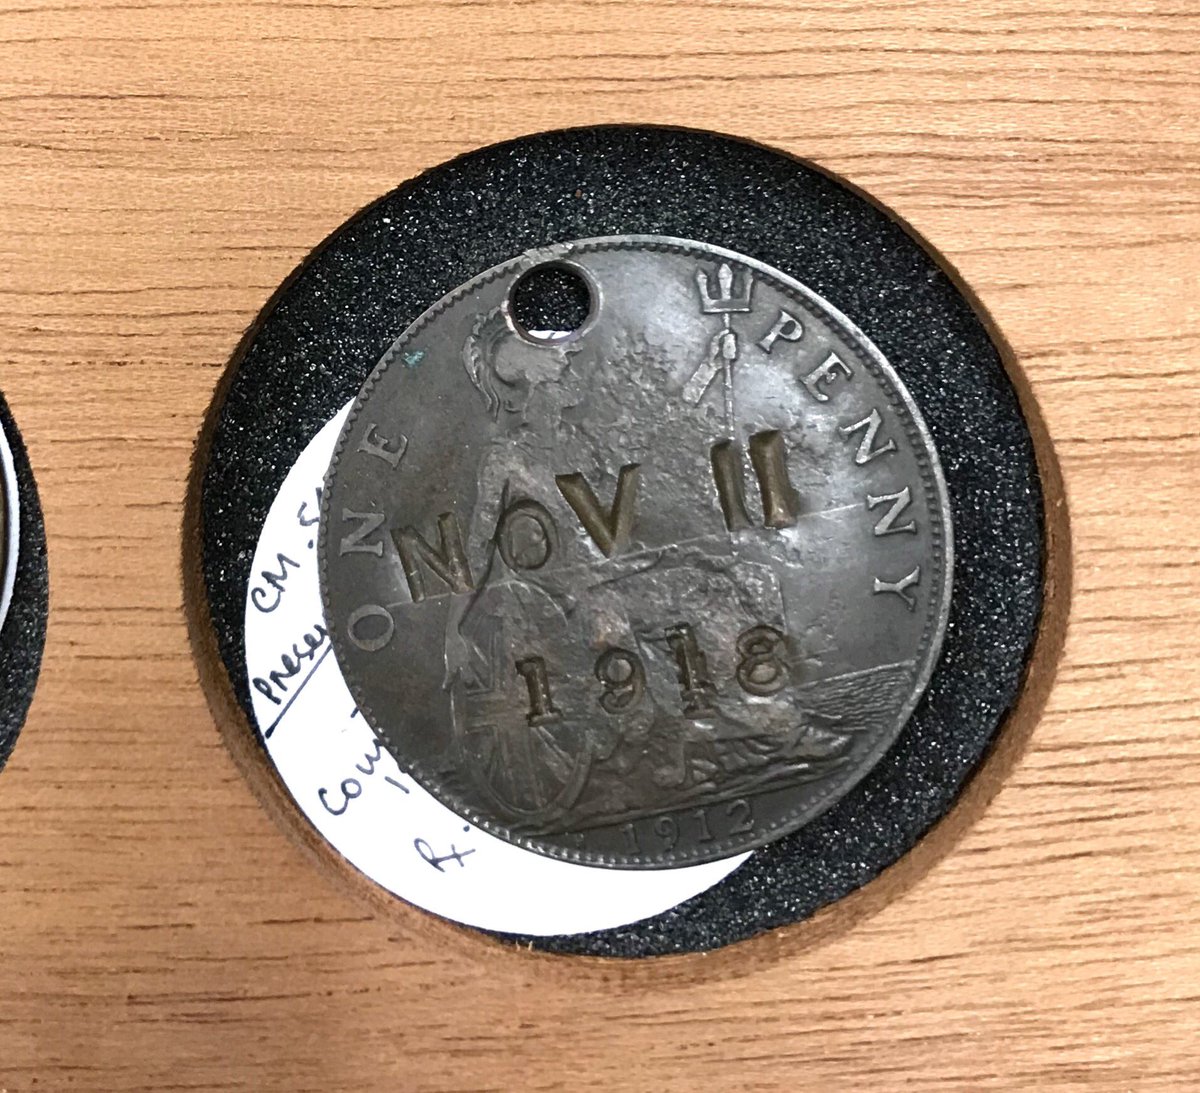 A 1912 English penny countermarked for Armistice Day “NOV 11 1918”, and perforated for suspension, probably to be worn.